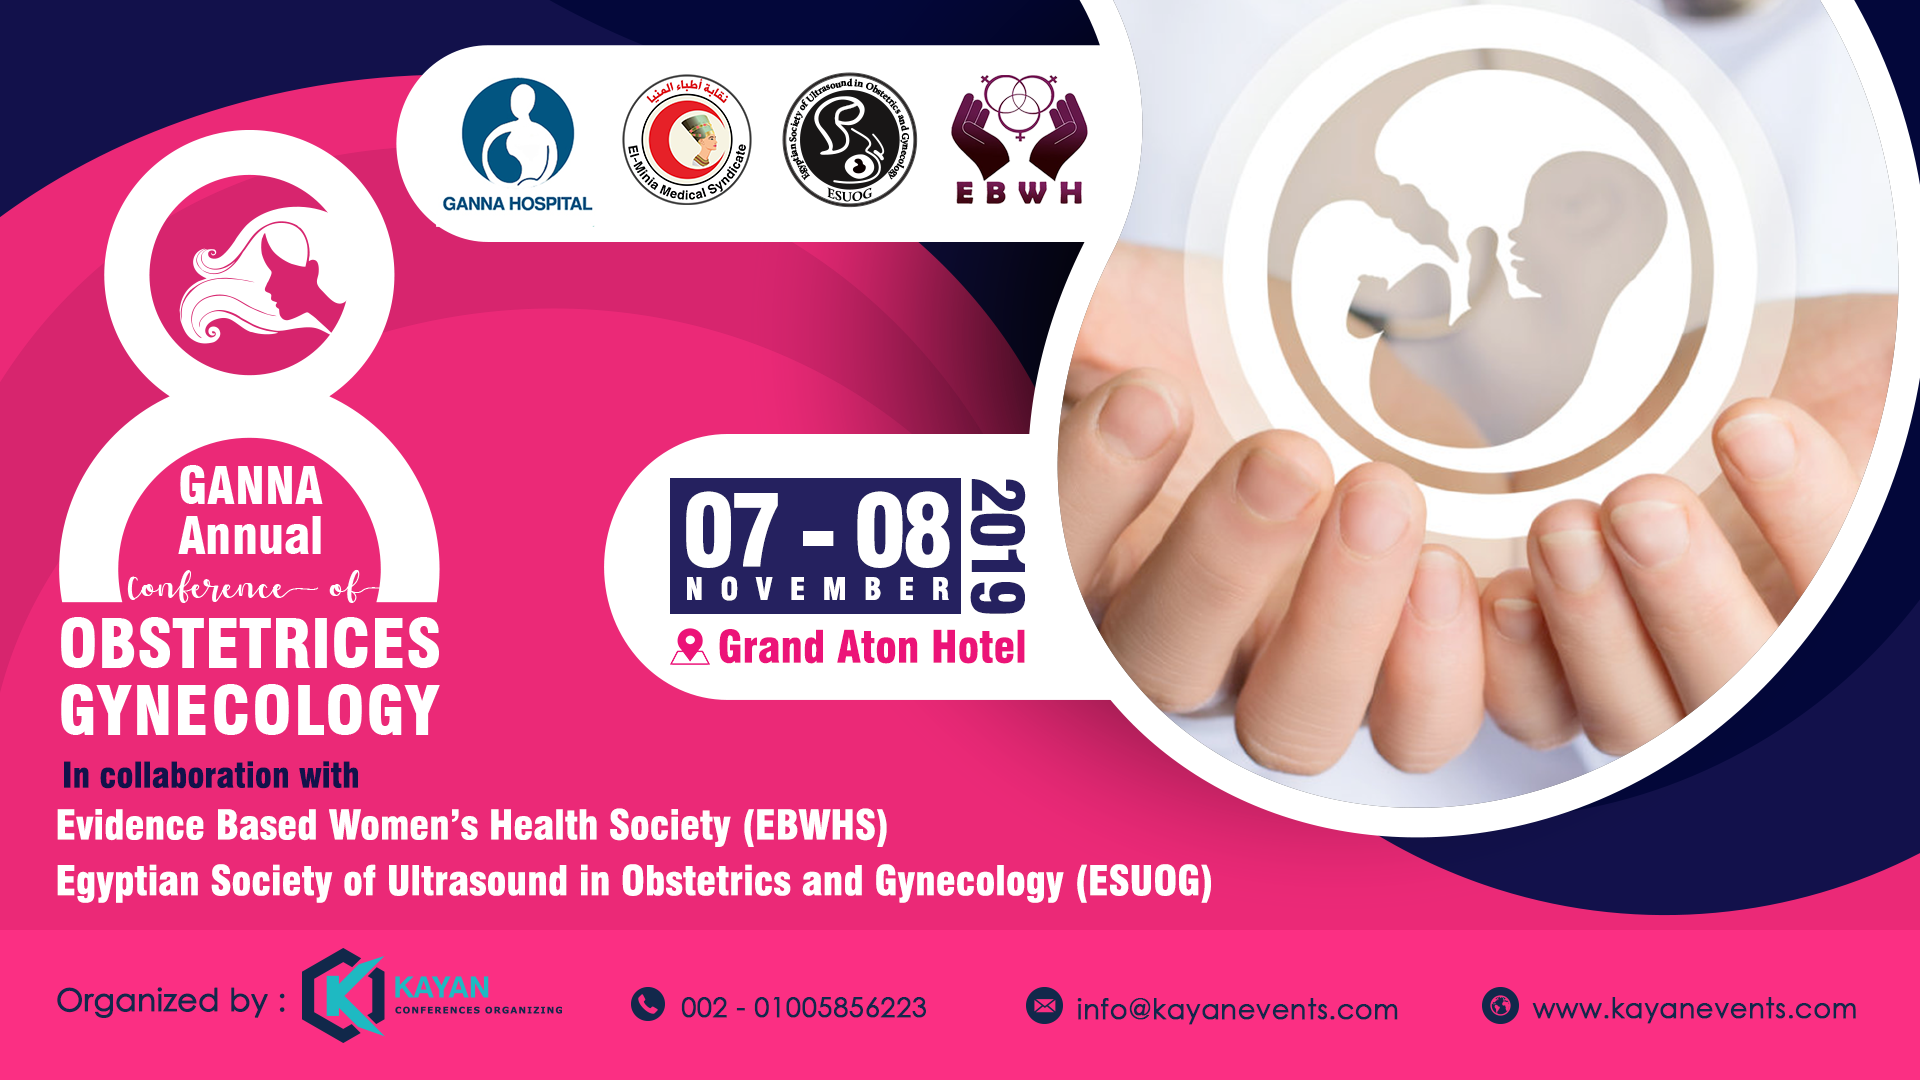 8th GANNA Obstetrics and Genecology Conference